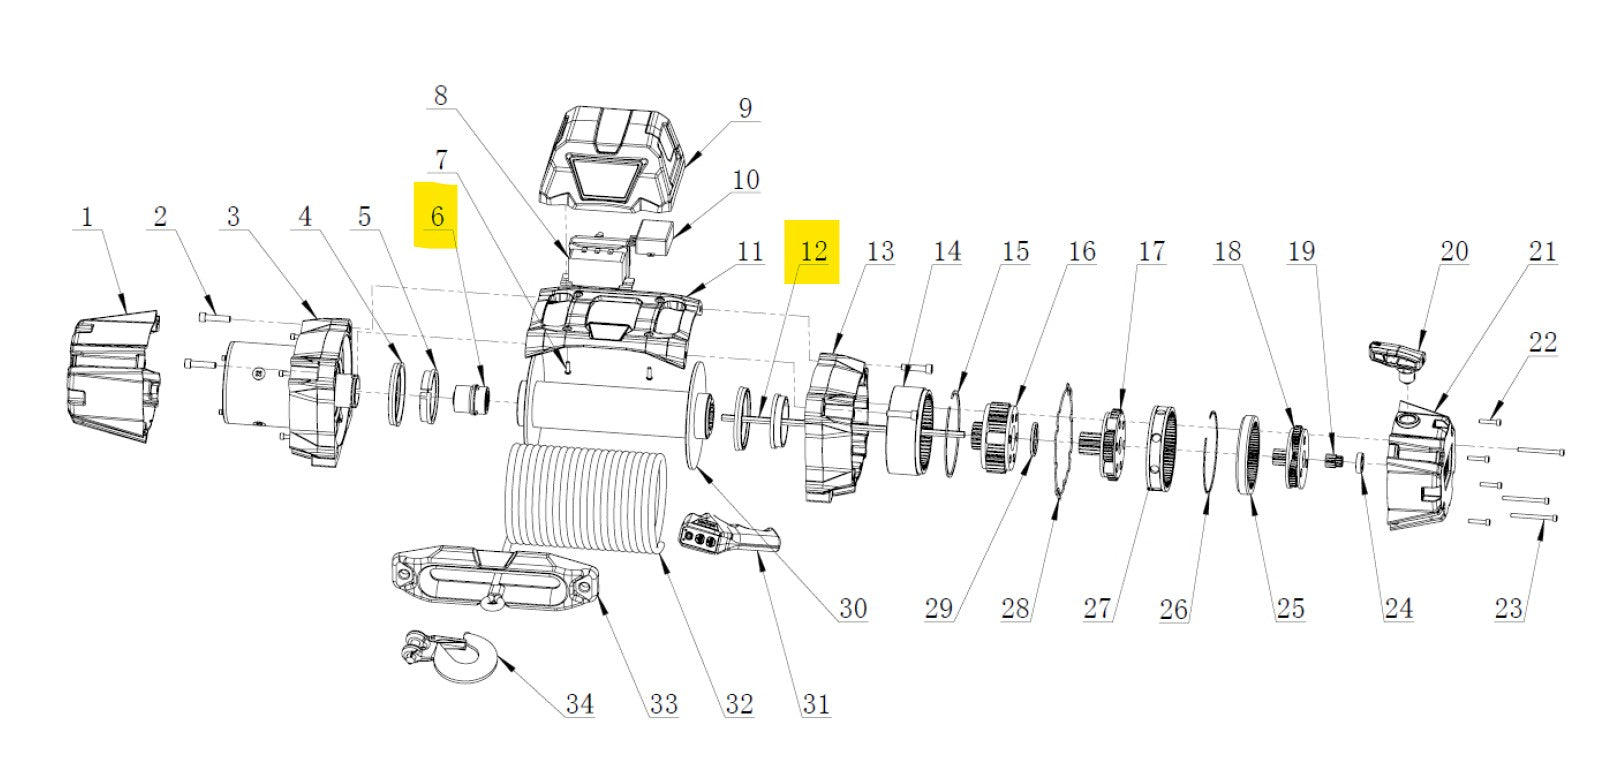 Parts drawing showing location of the parts